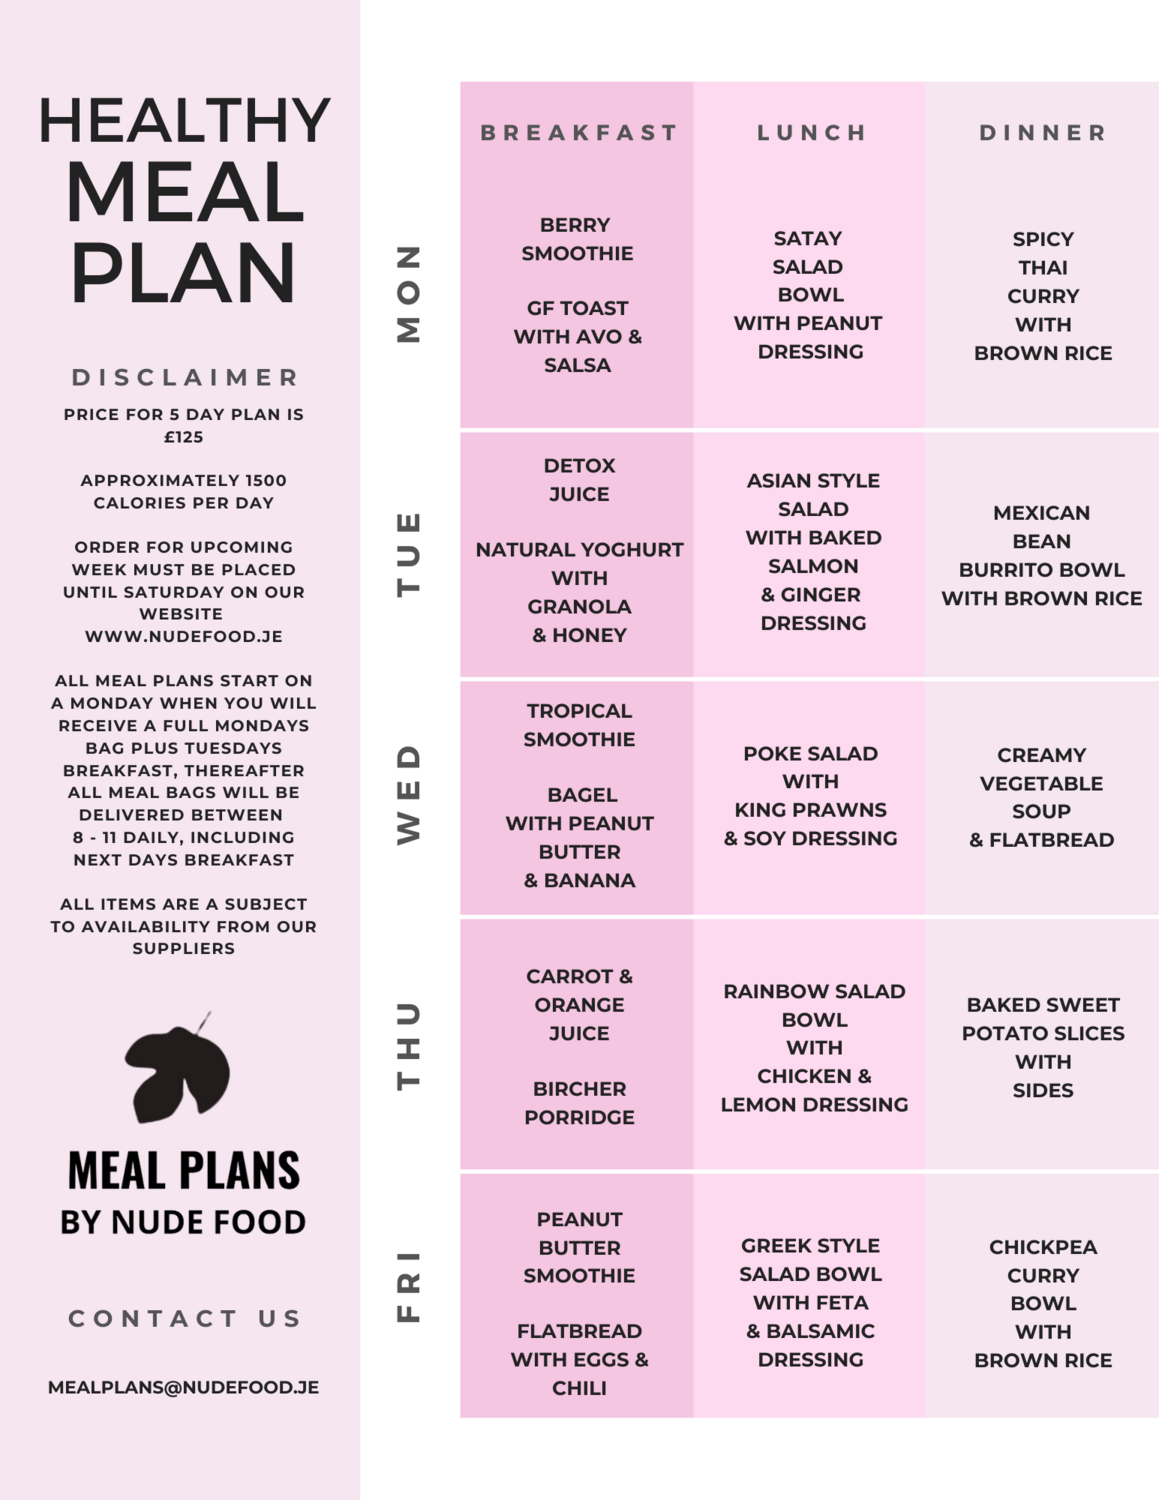 5 DAY HEALTHY MEAL PLAN